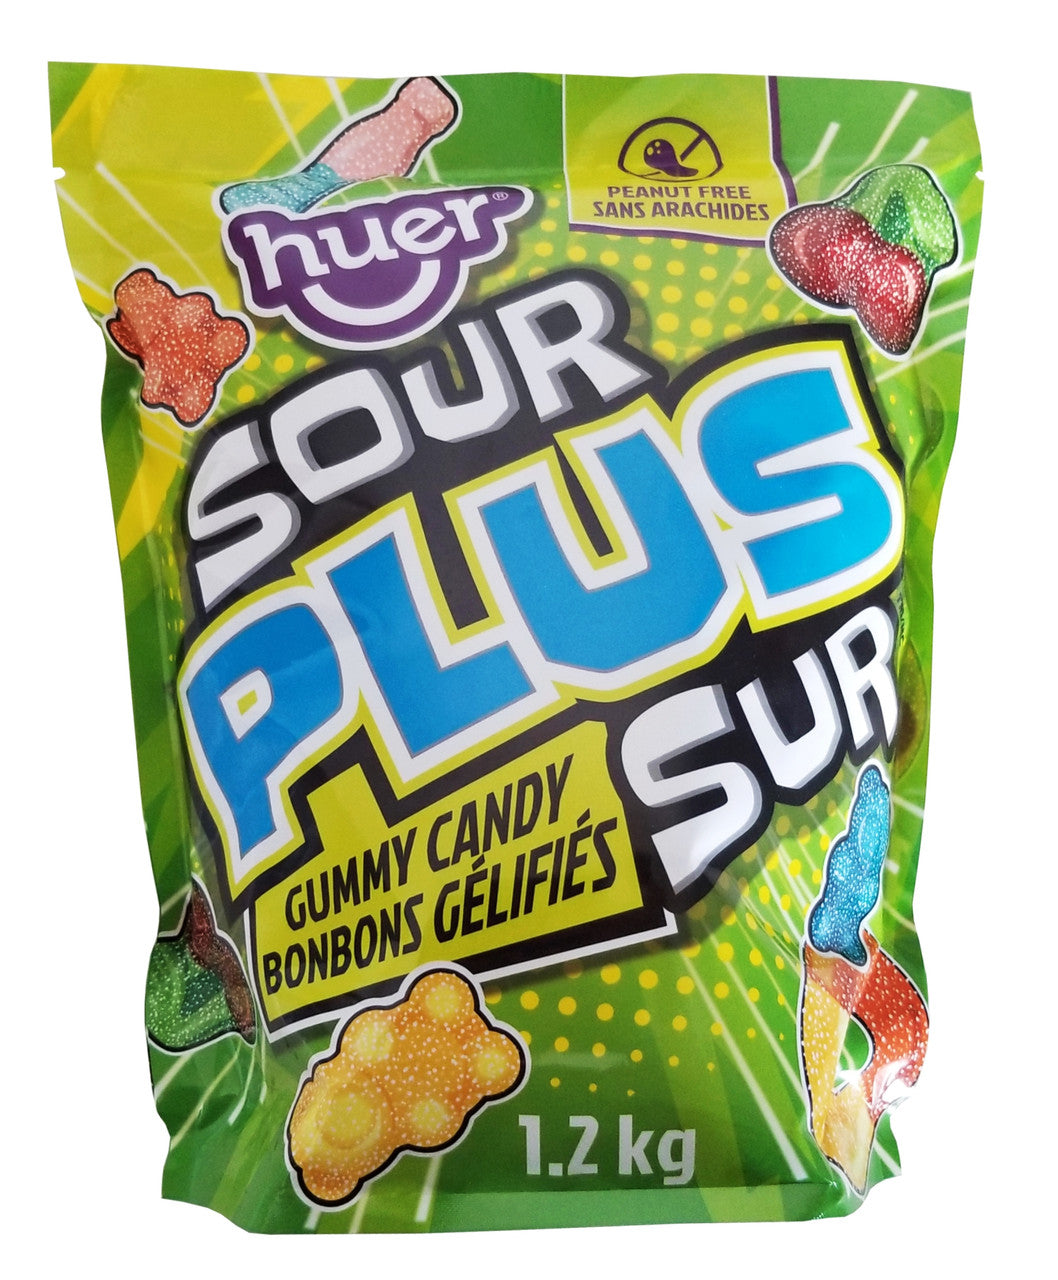 Huer Sour PLUS Gummy Candy, 1.2 kg/2.6 lbs., Bag {Imported from Canada}